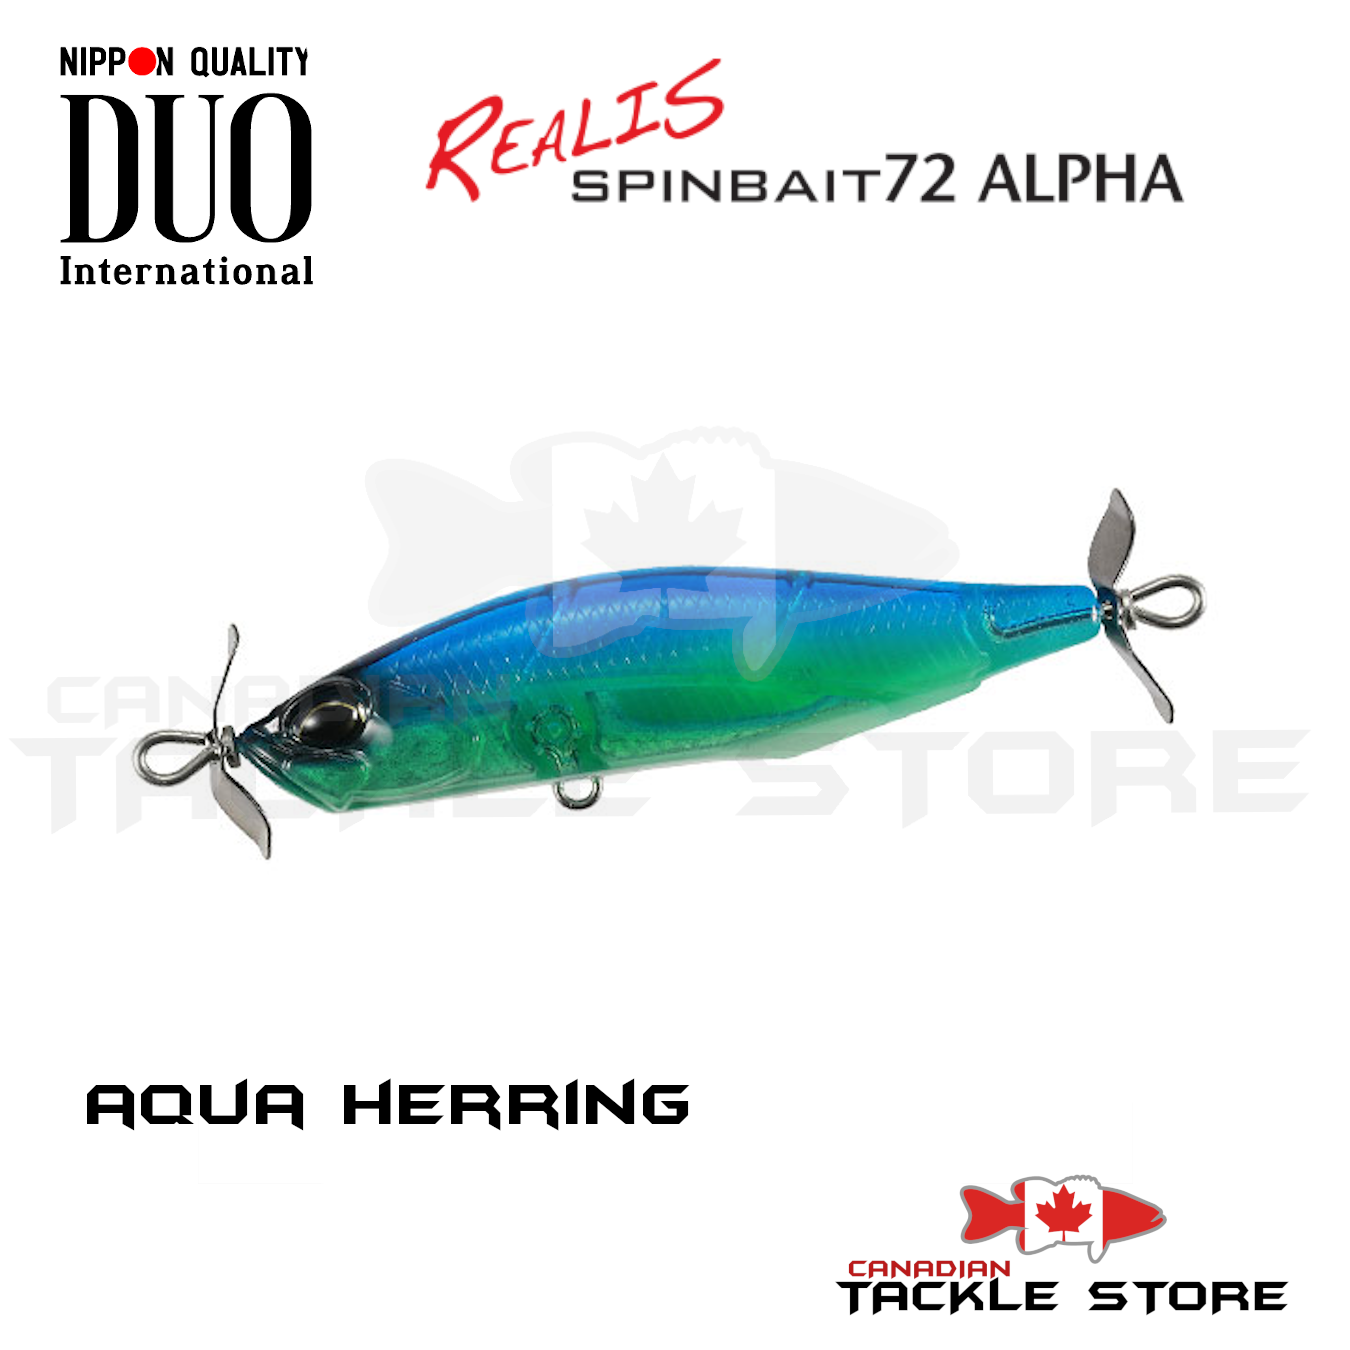 All Hard Baits – Canadian Tackle Store